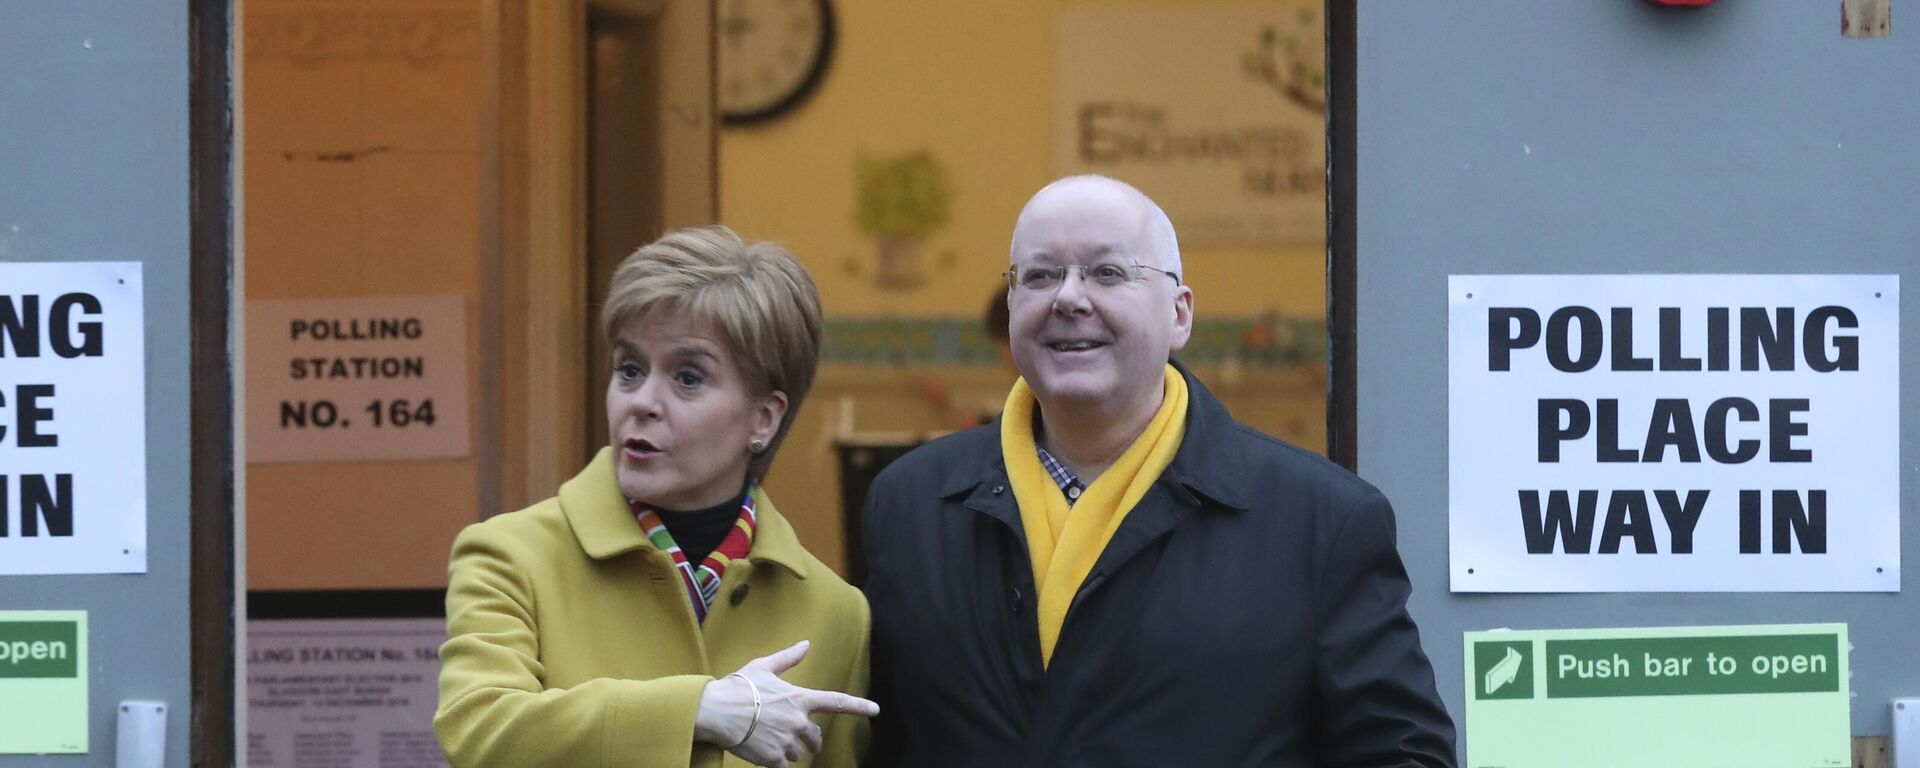 Former Scottish First Minister Nicola Sturgeon poses for the media with husband Peter Murrell, outside polling station in Glasgow, Scotland - Sputnik International, 1920, 05.04.2023